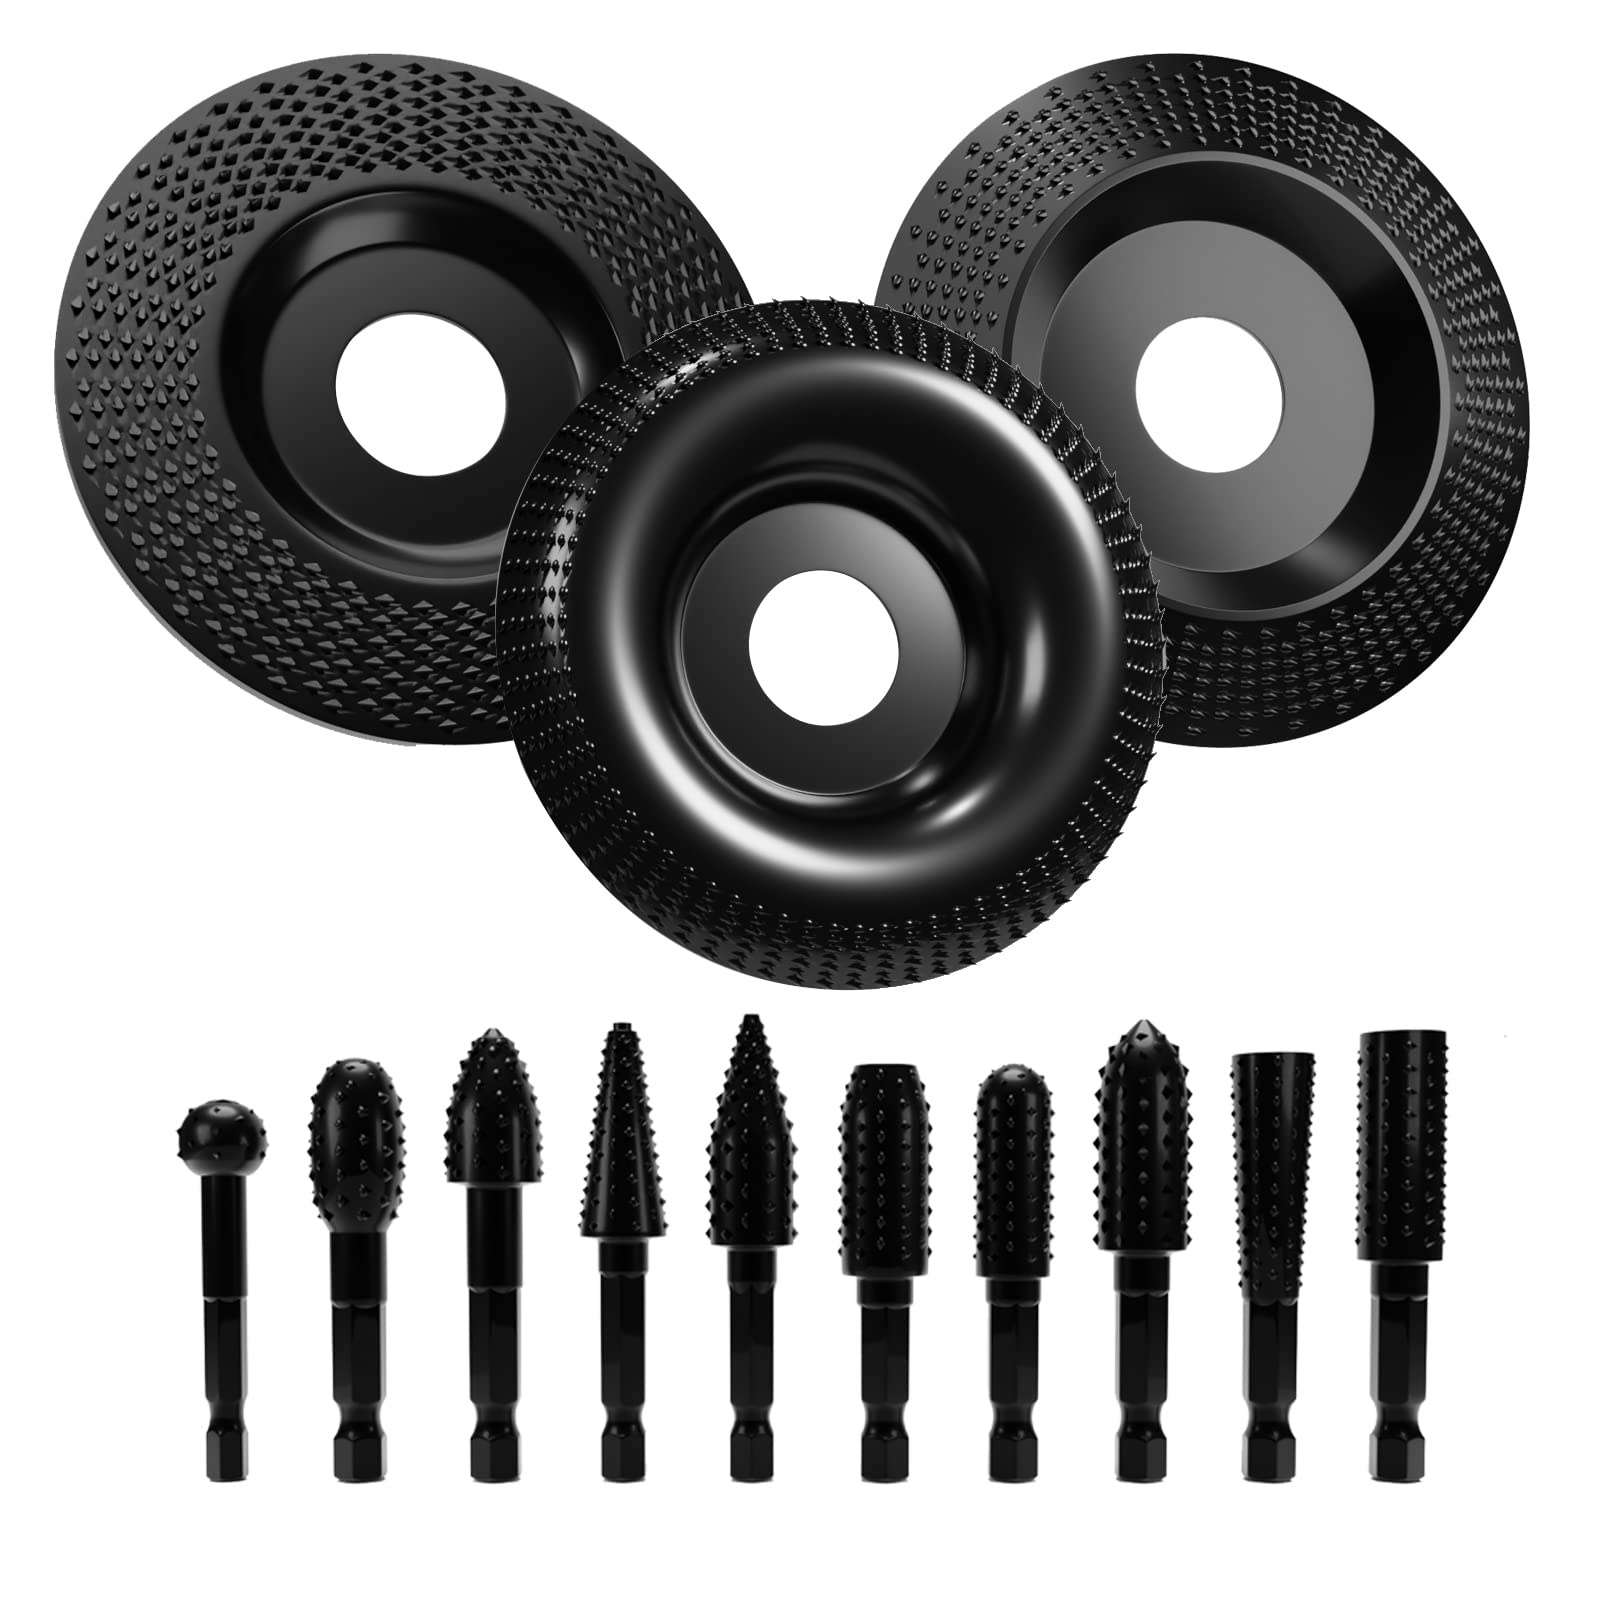 CSOOM Wood Turbo Carving Disc 13 Pieces Set for Wood Cutting, Grinder Cutting Wheel Attachments